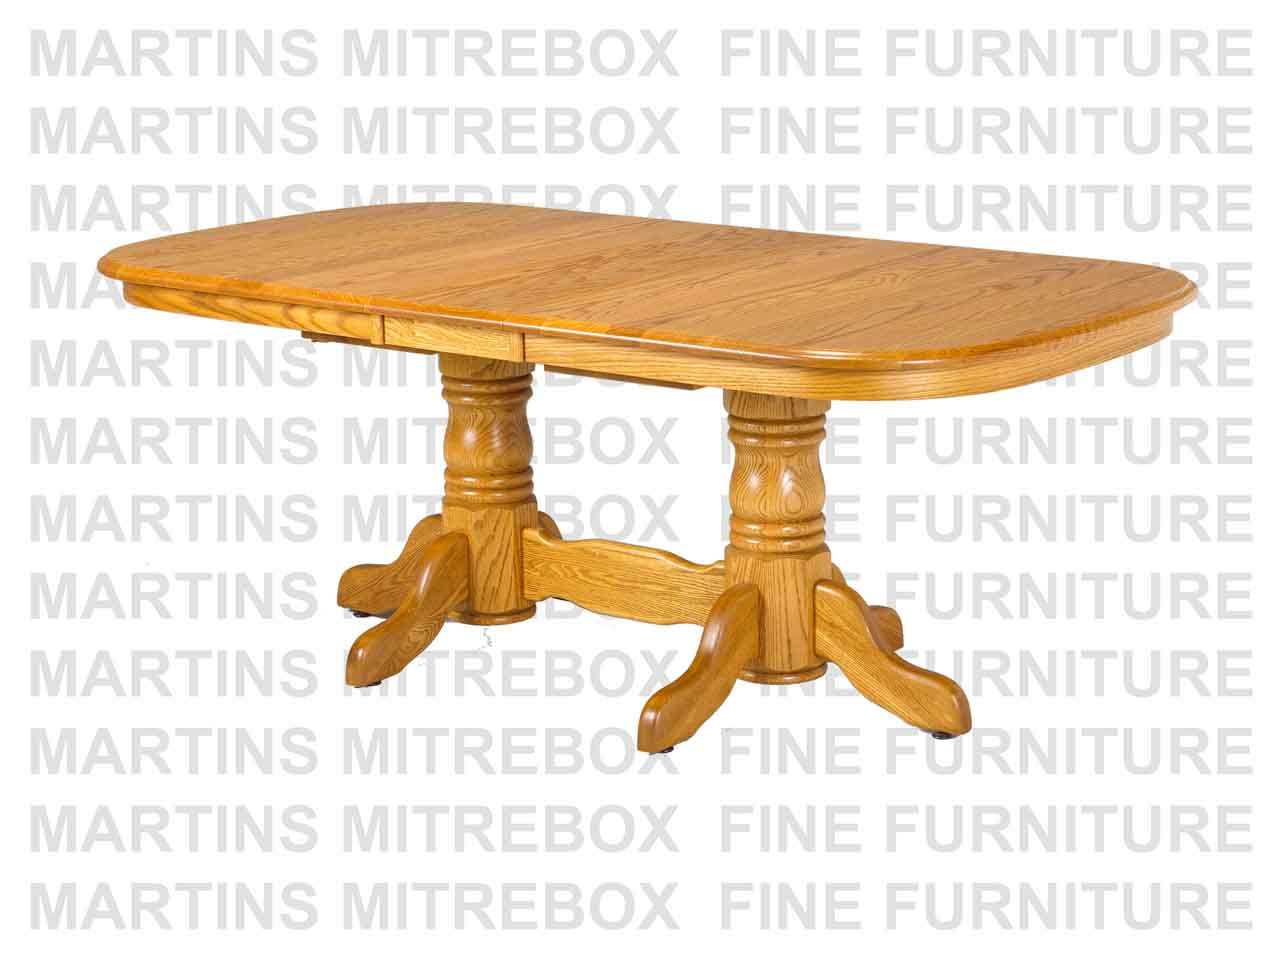 Maple Martin Collection Double Pedestal Table 48''D x 72''W x 30''H. Table Has 1.25'' Thick Top.